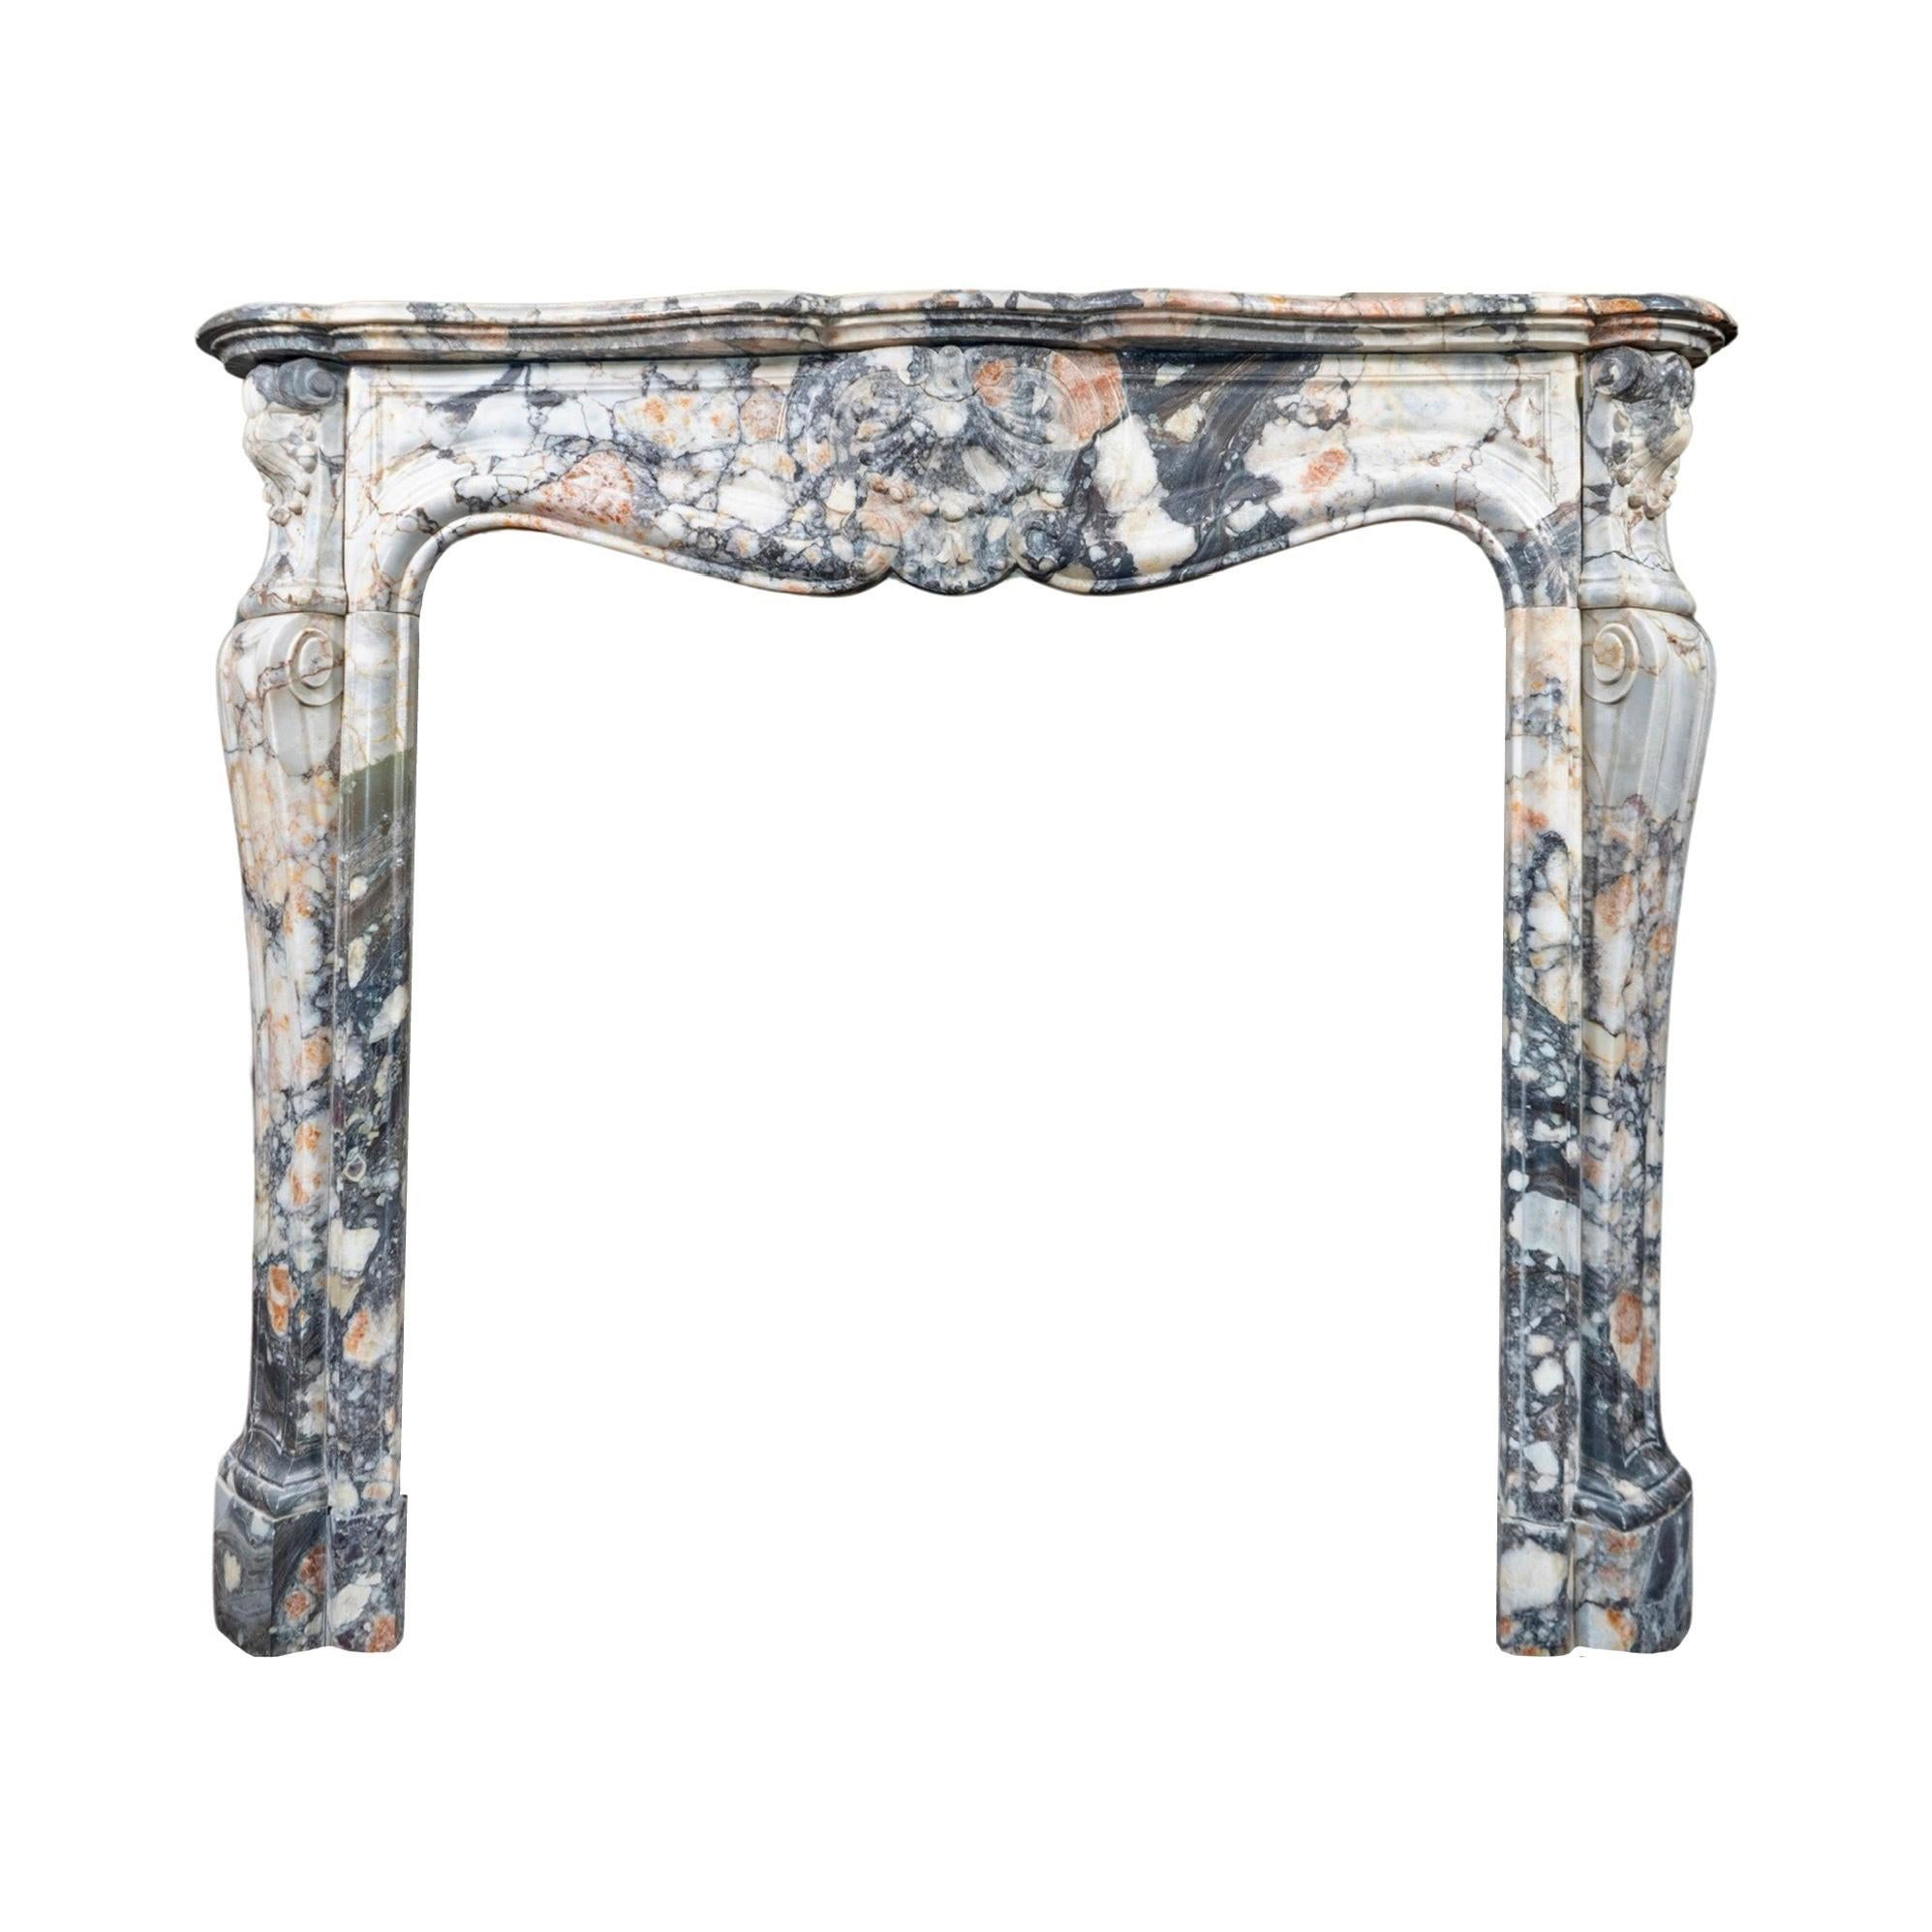 Crafted in France during the 1890s, this French African Breccia Marble Mantel boasts intricate carvings throughout the piece. Made from stunning African Breccia stone, this mantel is a perfect blend of elegance and durability, making it a timeless